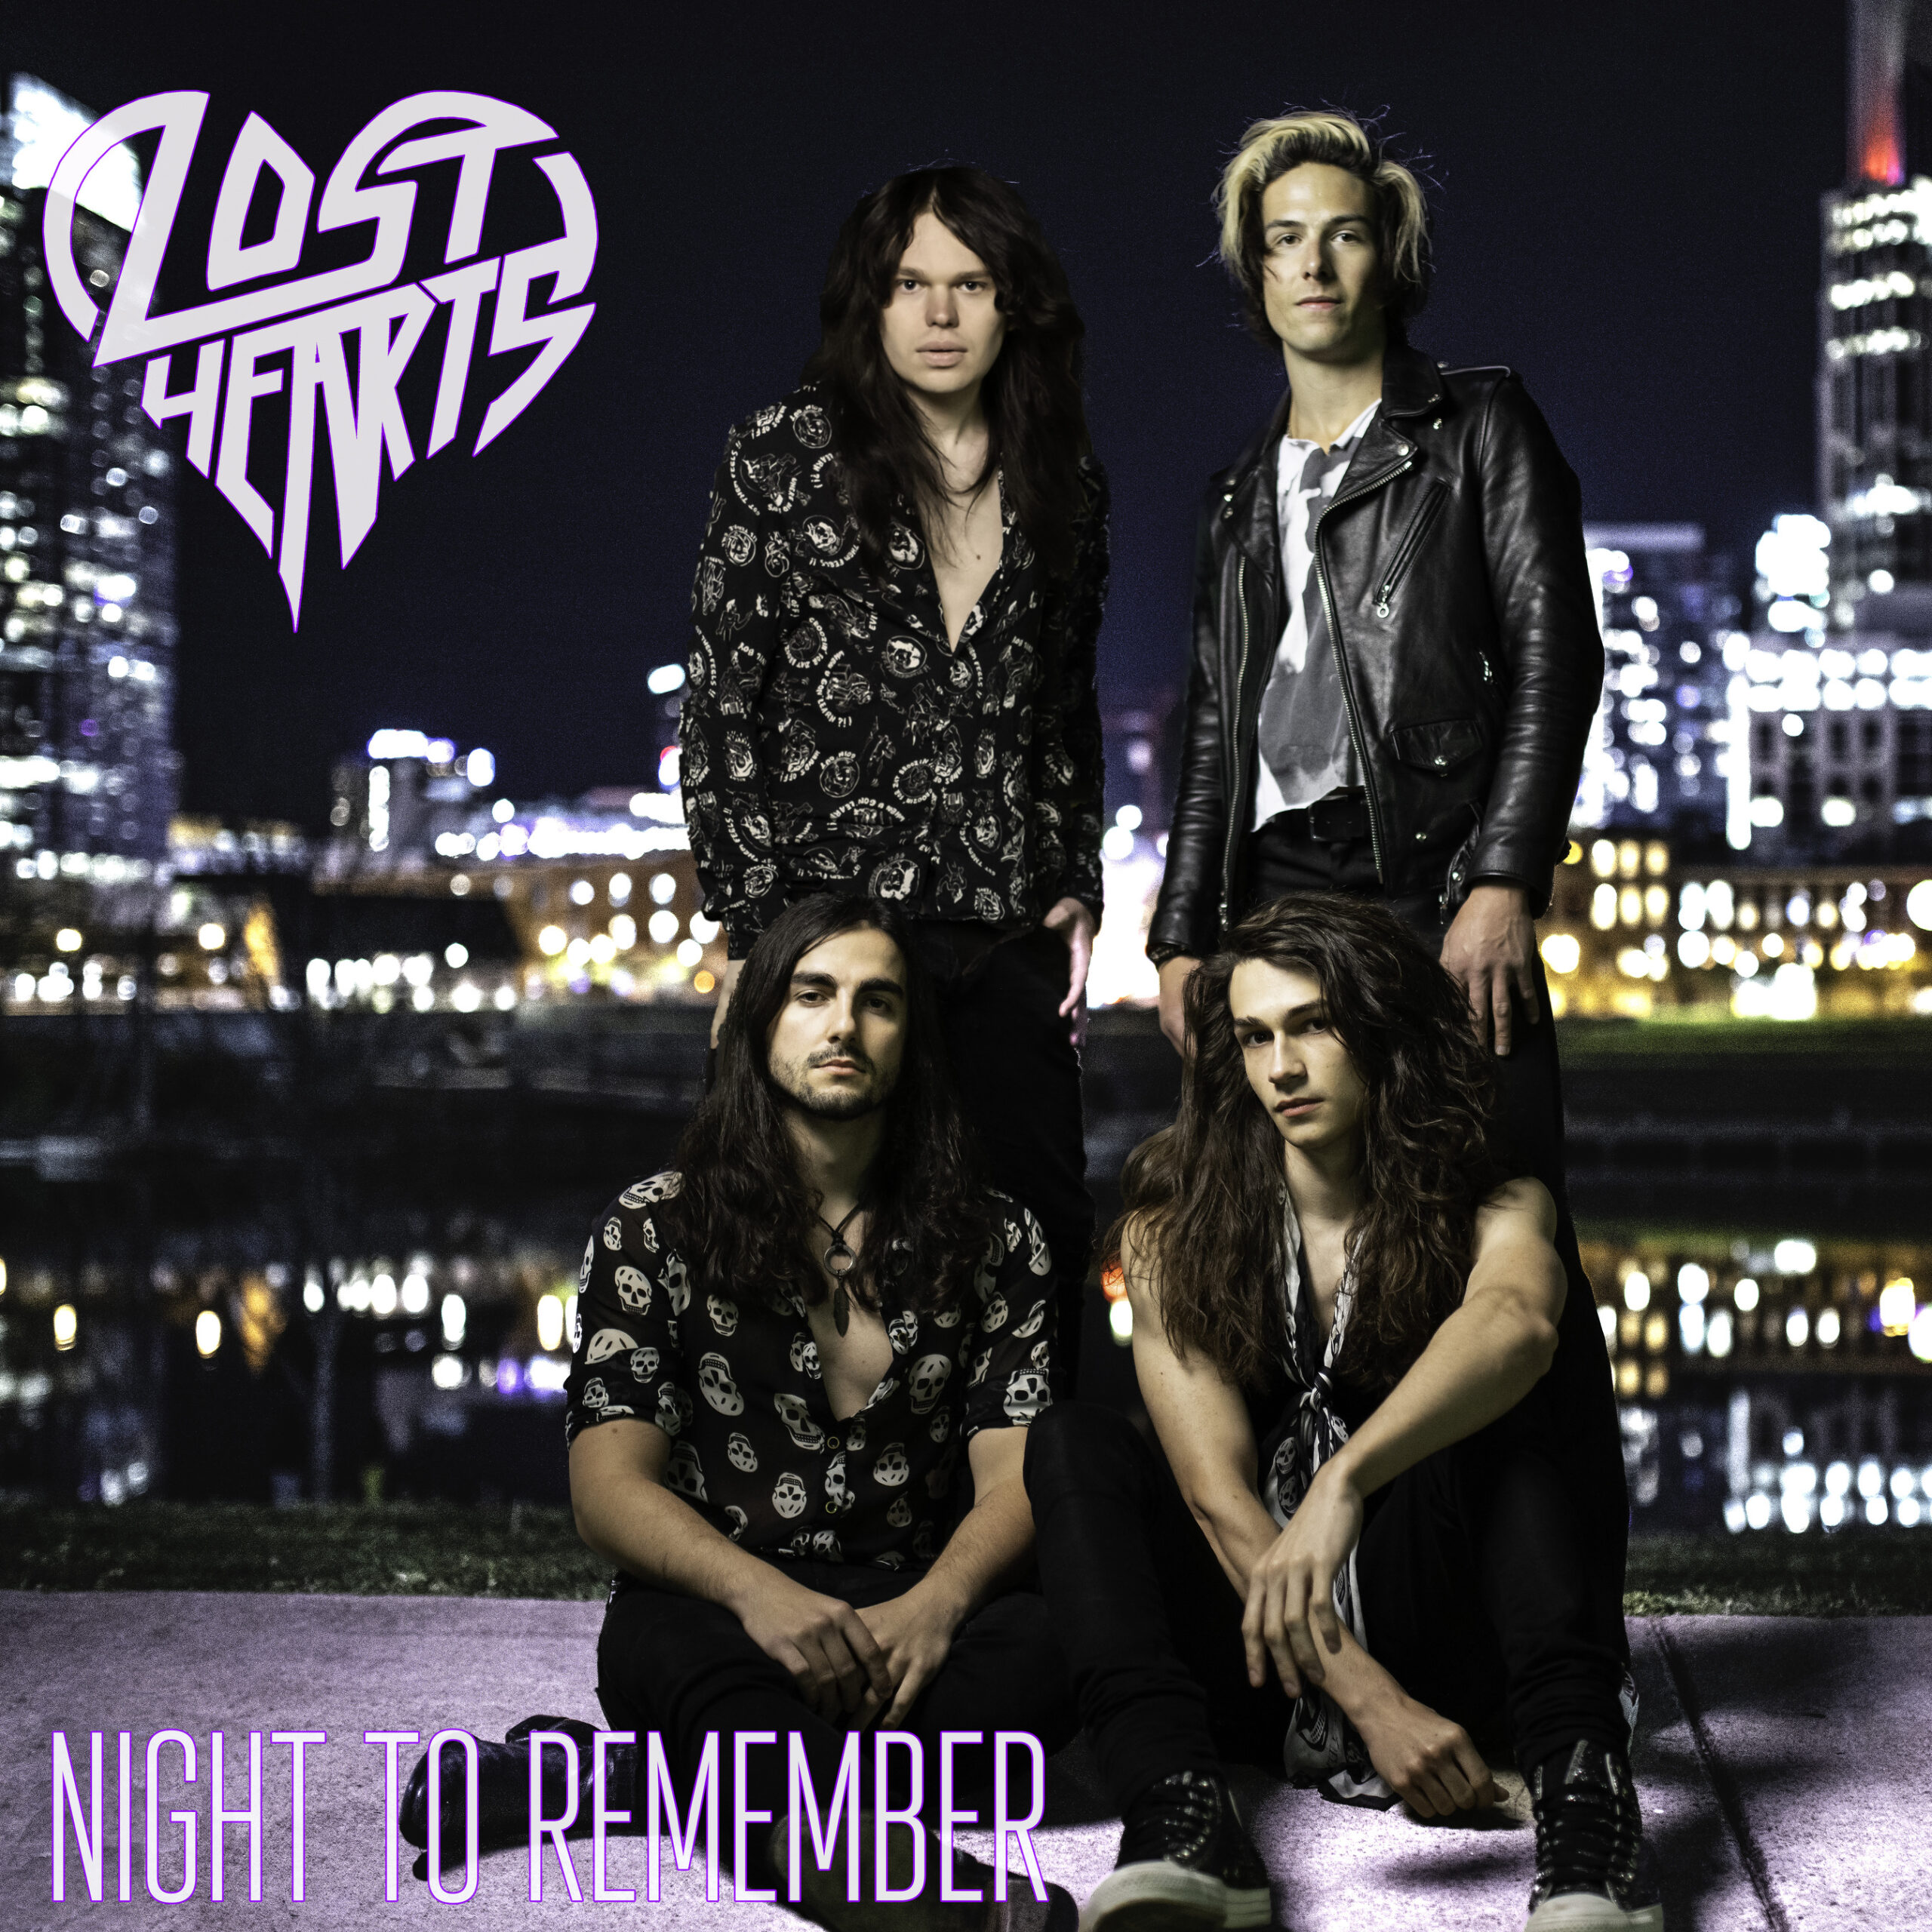 Lost Hearts "Night to Remember"